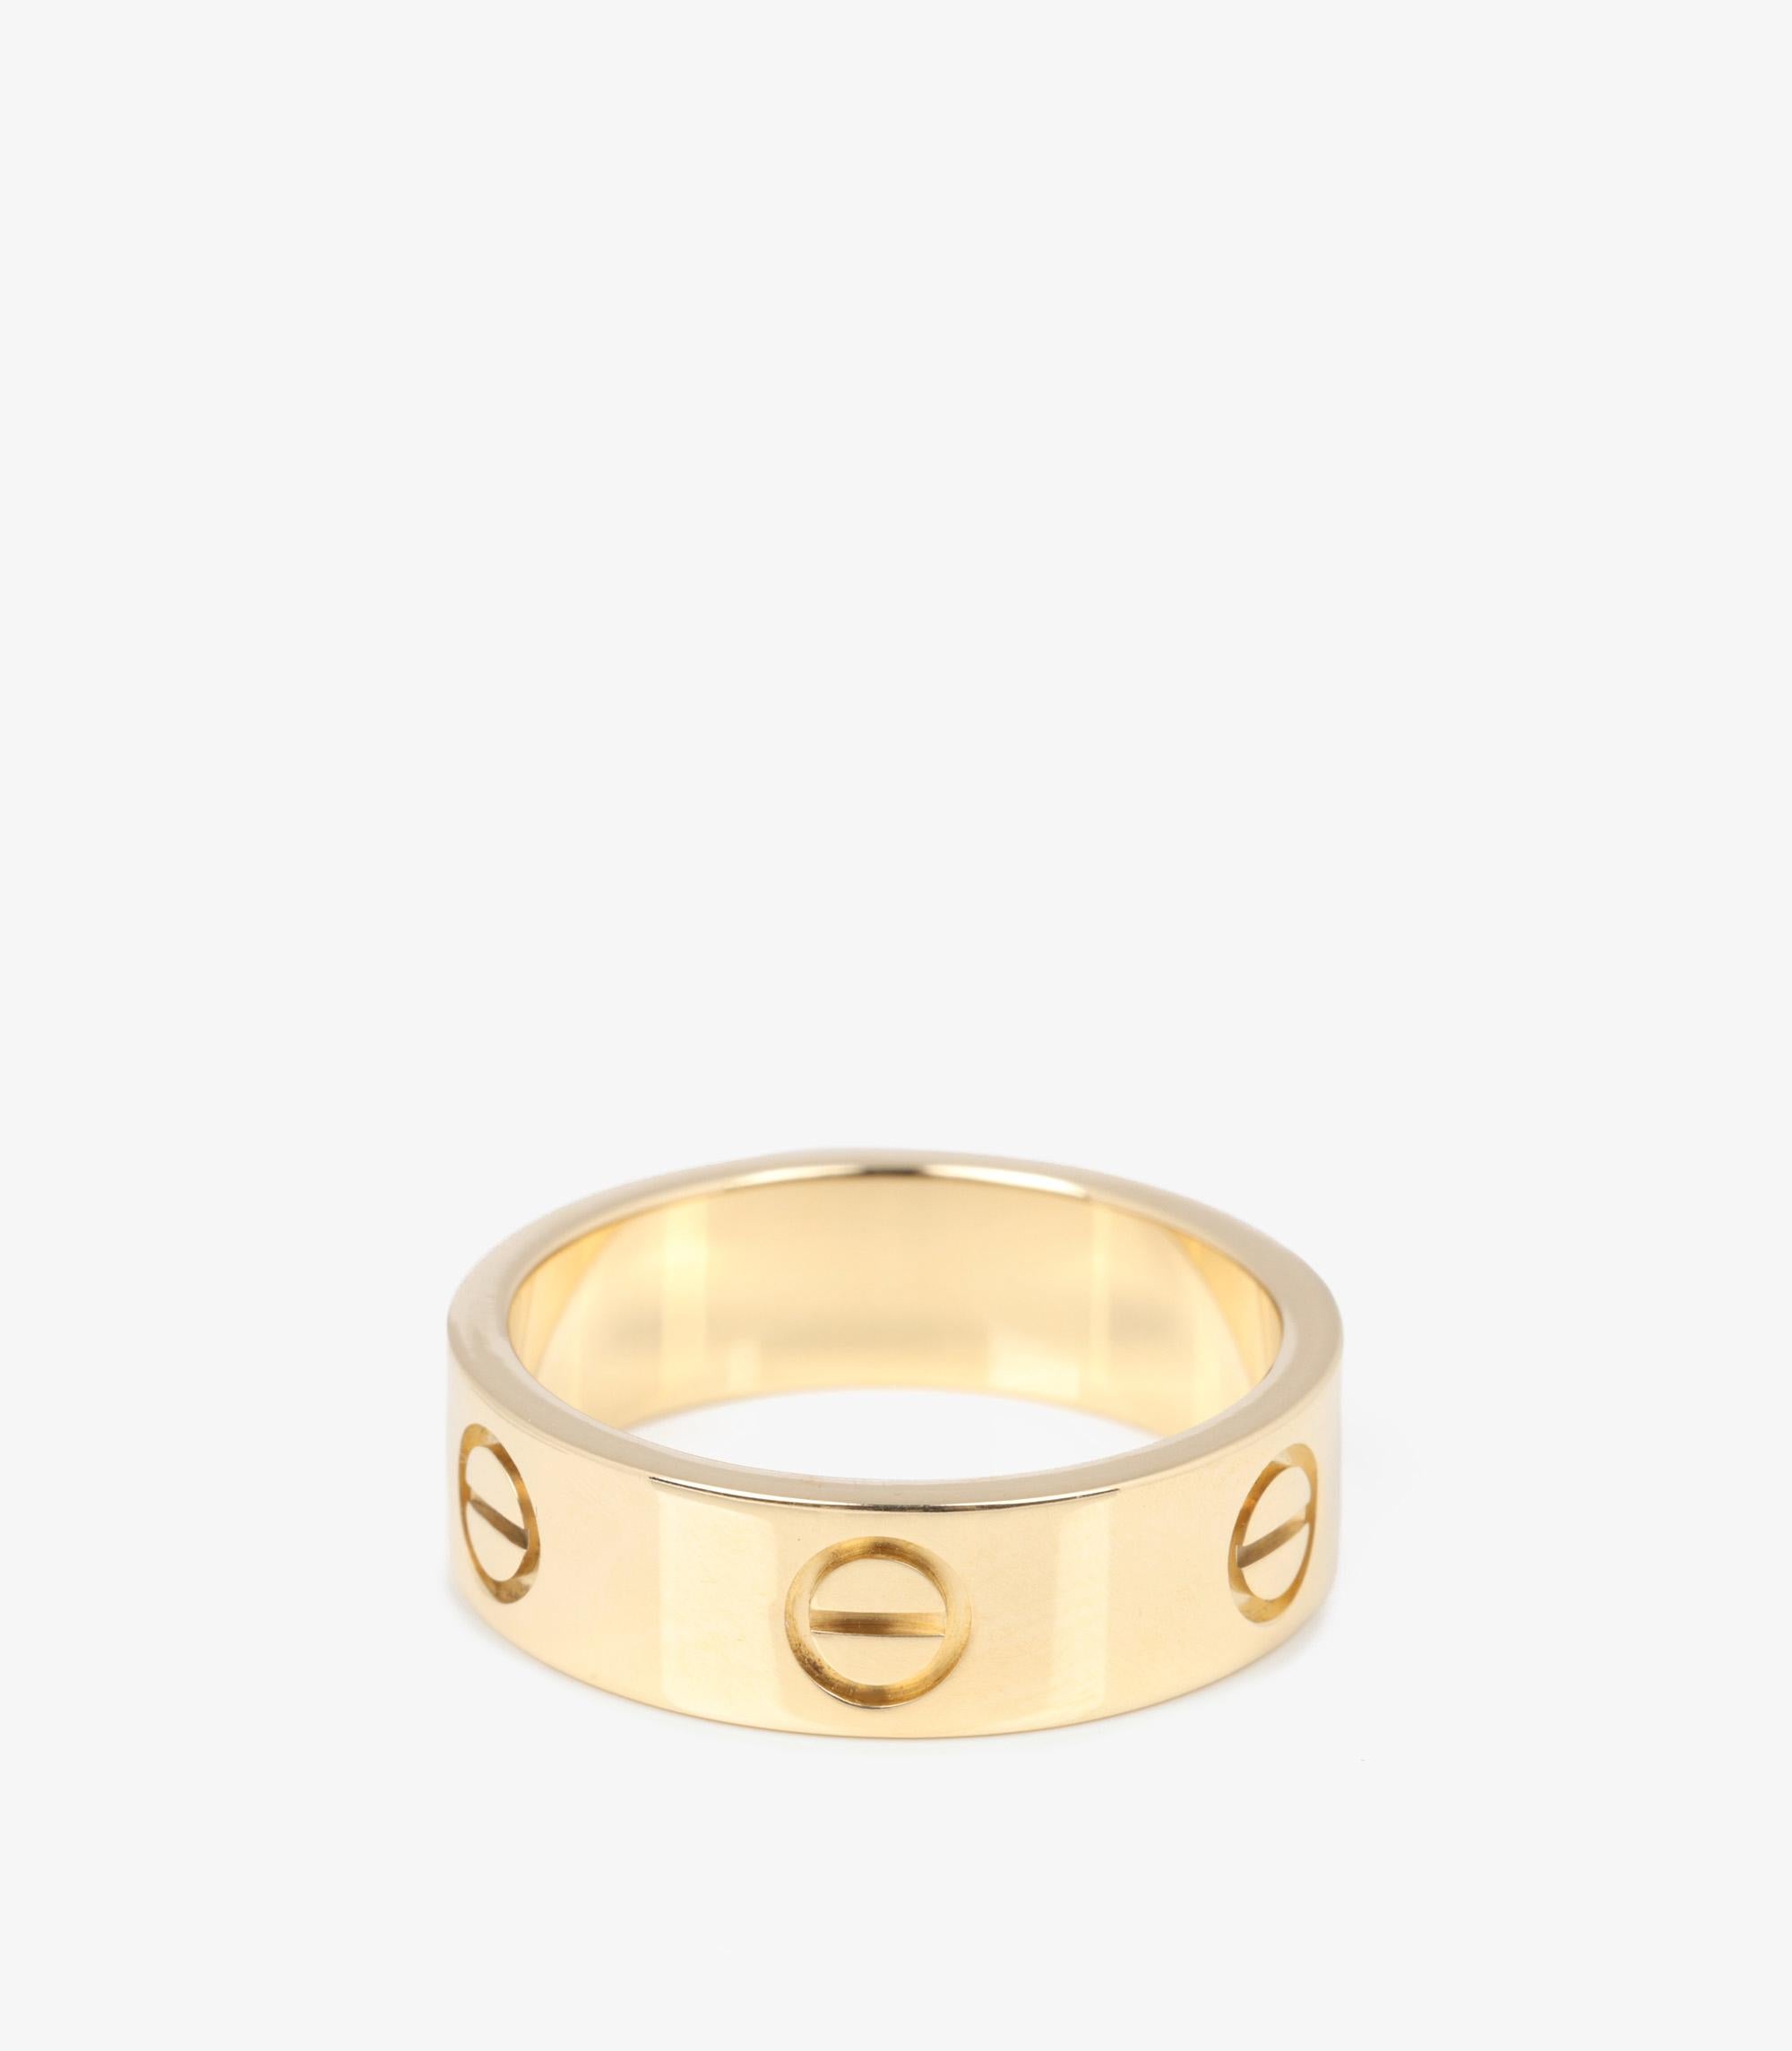 Cartier 18ct Yellow Gold Love Band

Brand- Cartier
Model- Love Band Ring
Product Type- Ring
Serial Number- G5****
Material(s)- 18ct Yellow Gold
UK Ring Size- L 1/2
EU Ring Size- 52
US Ring Size- 6
Resizing Possible- No

Band Width- 5.2mm
Total